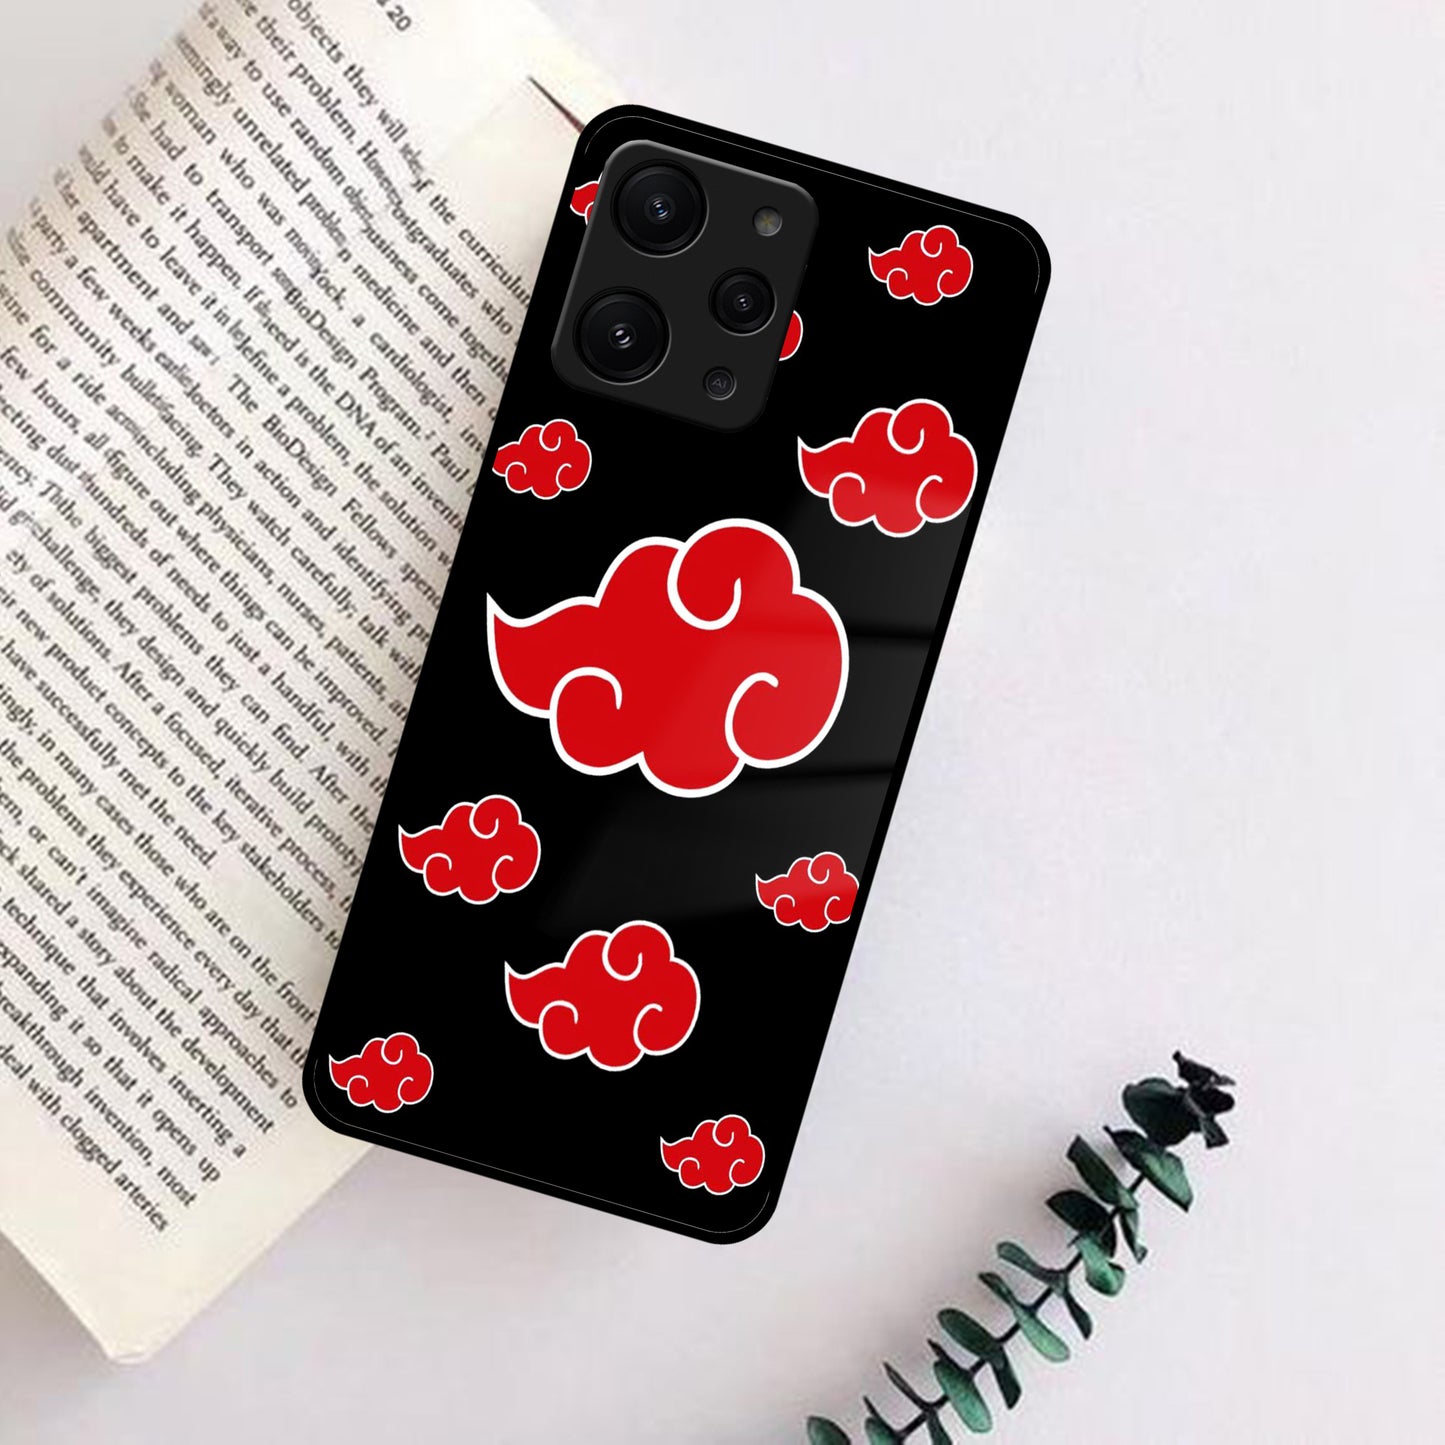 Red Cloud Mobile Glass Phone Case Cover For Redmi/Xiaomi